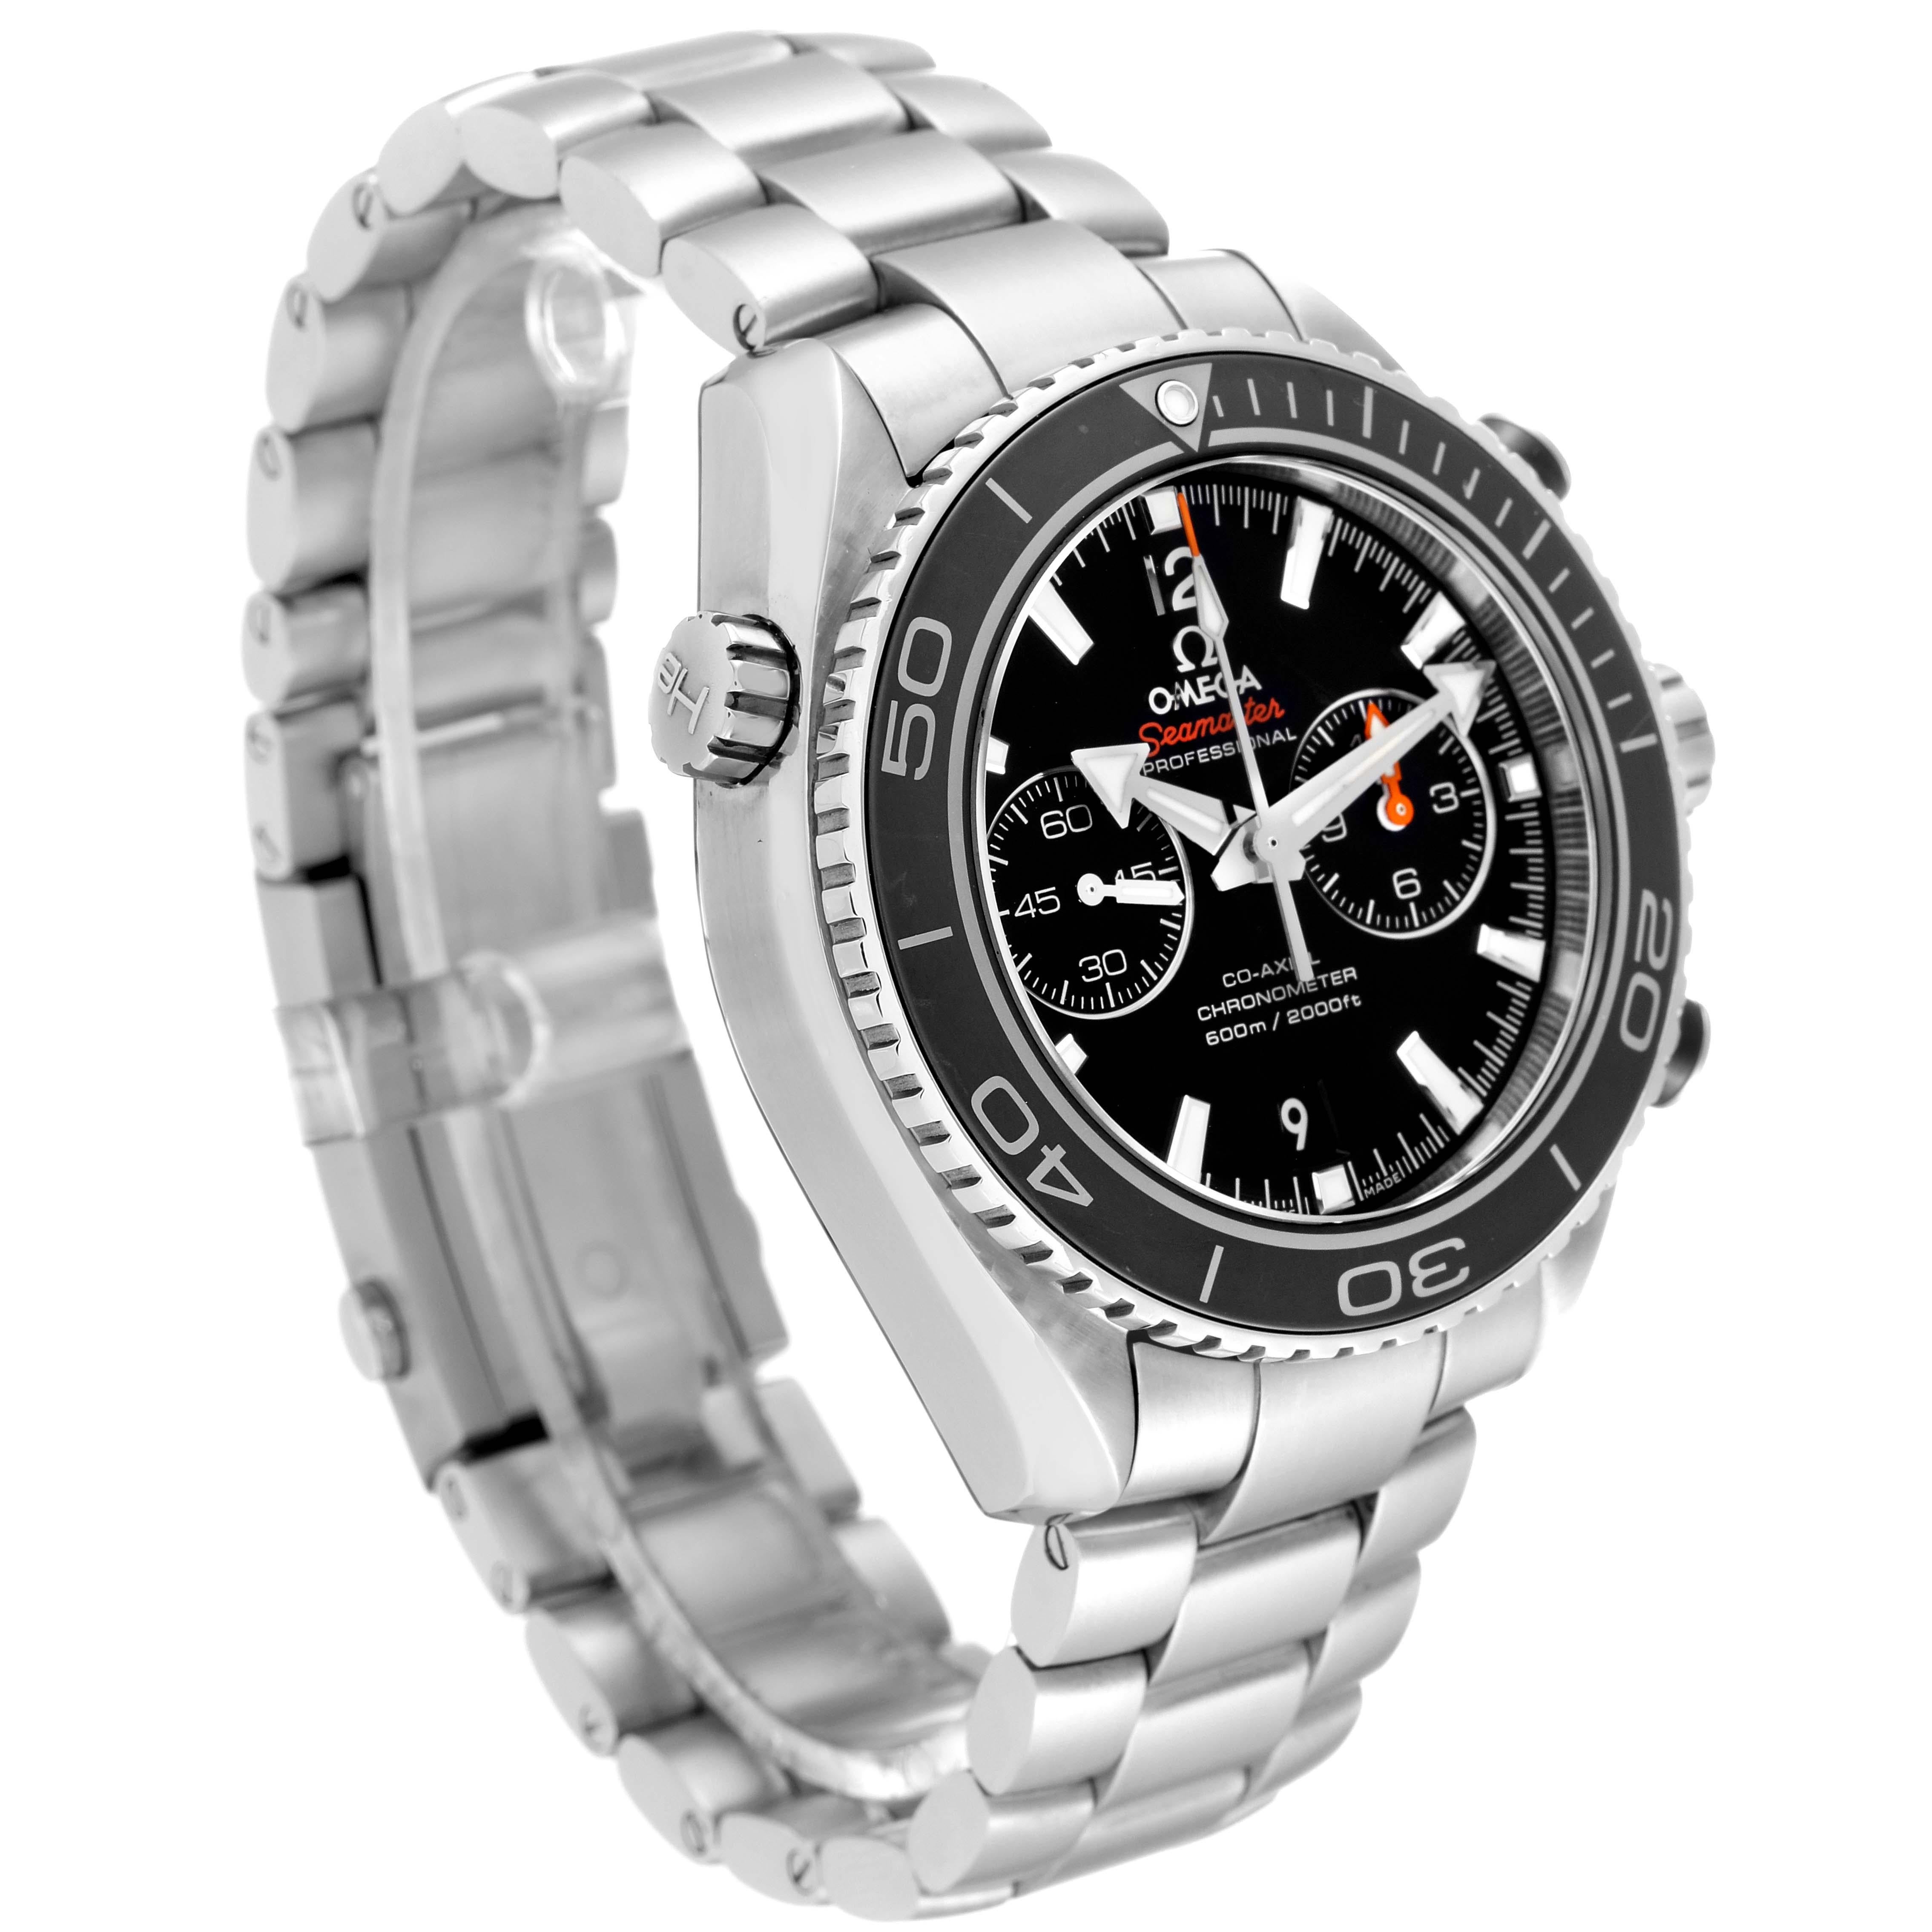 Omega Seamaster Planet Ocean 600M Steel Mens Watch 232.30.46.51.01.001 Box Card For Sale 2